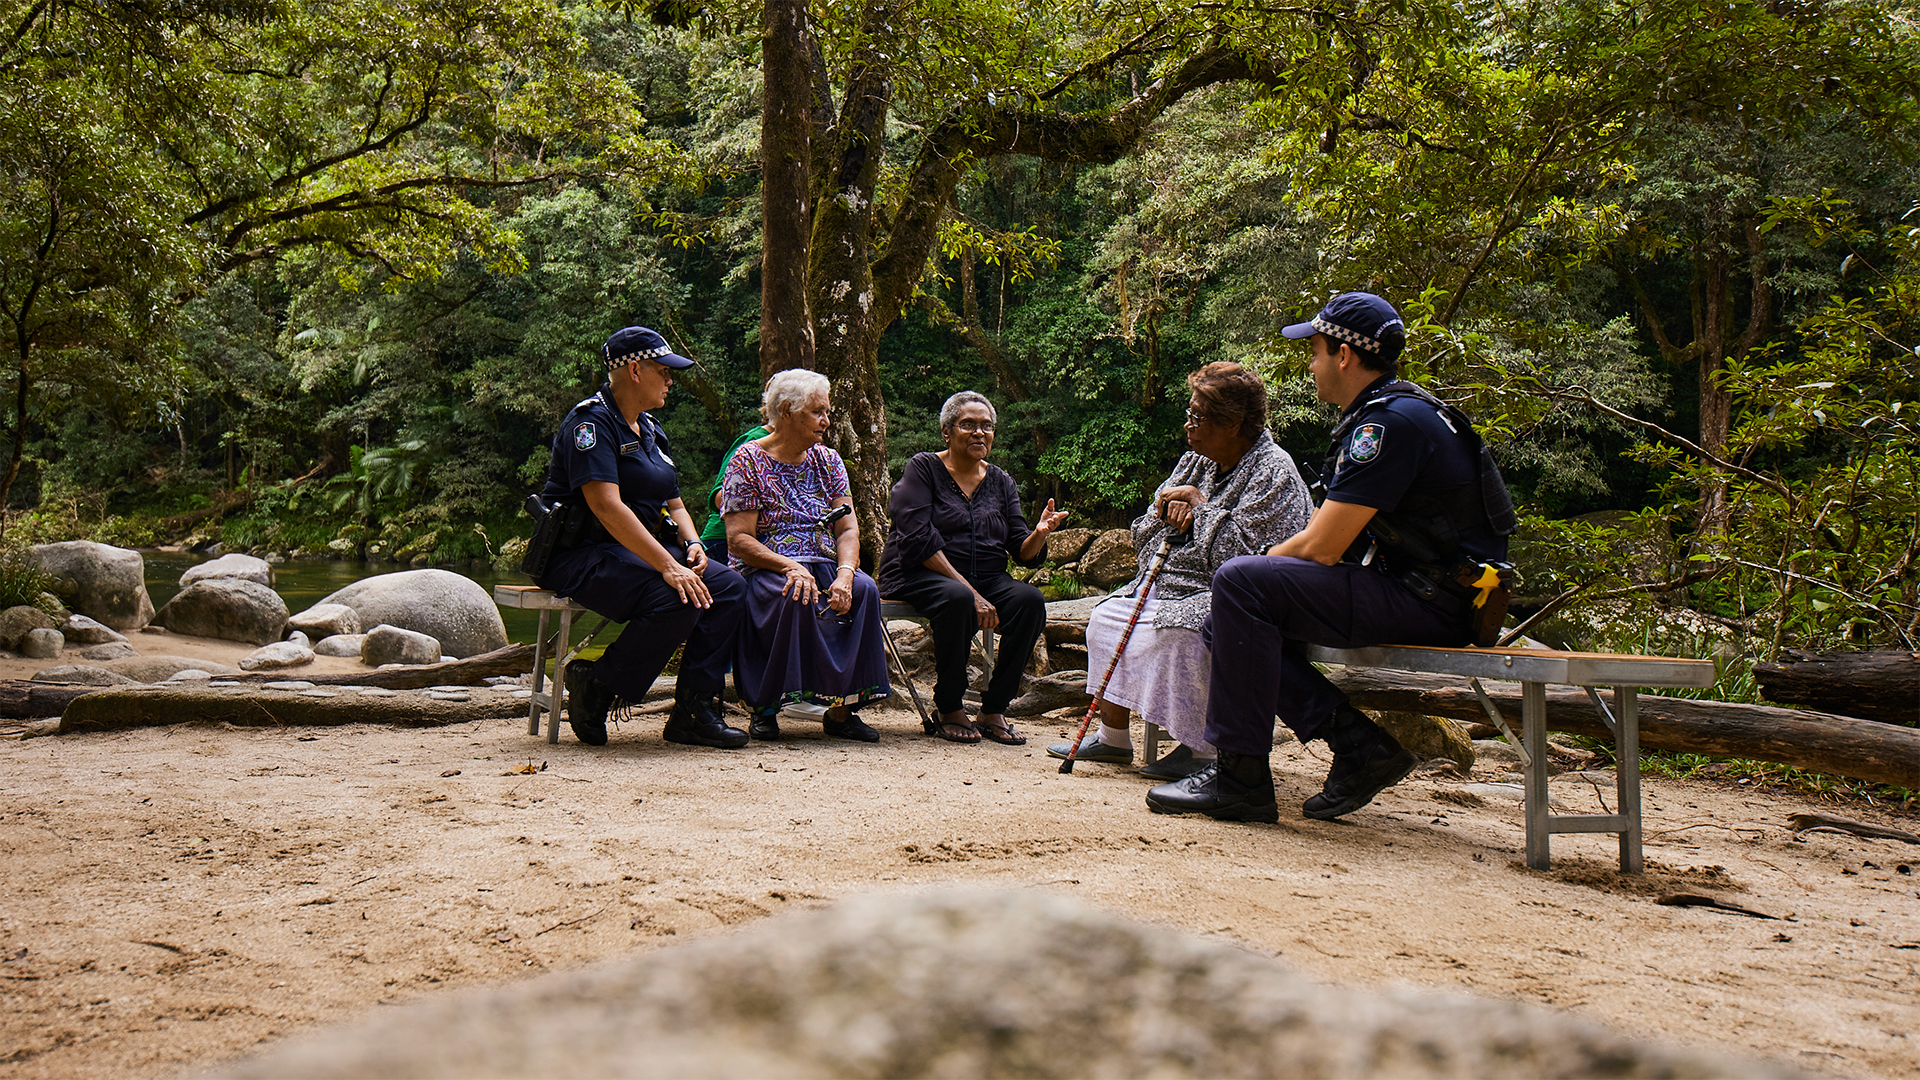 A group of First Nation's People's having a yarn with Queensland Police officers sat by a creek in the forest.